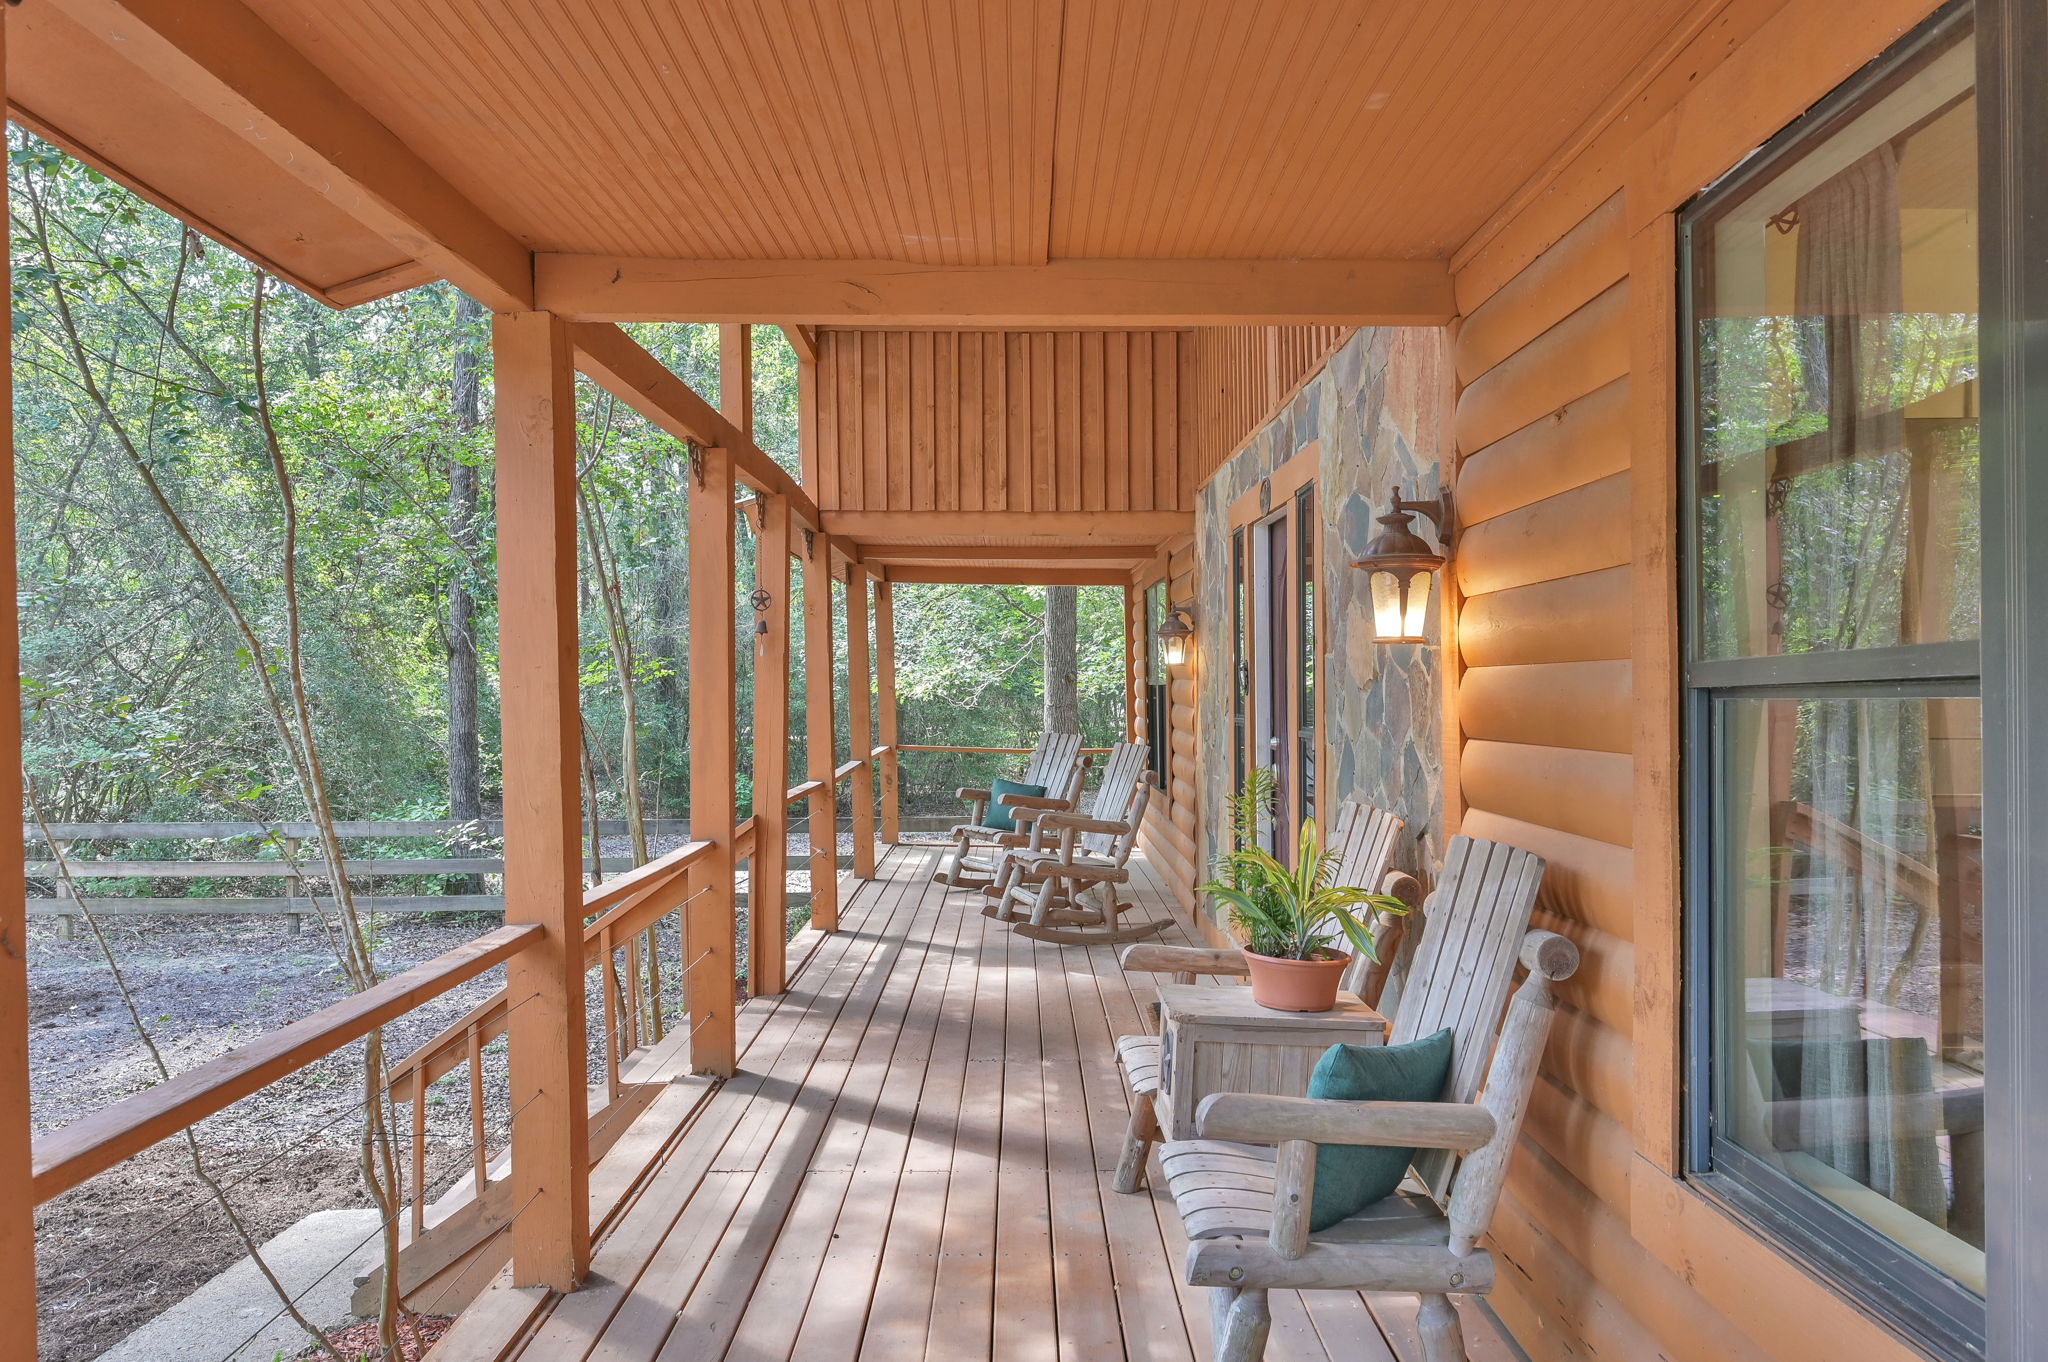 Approx. FRONT PORCH measurements: 44' x 7.5'. Imagine sitting outside in your favorite chair reading a nice book, sipping on a cup of coffee, enjoying nature. Oh how relaxing!